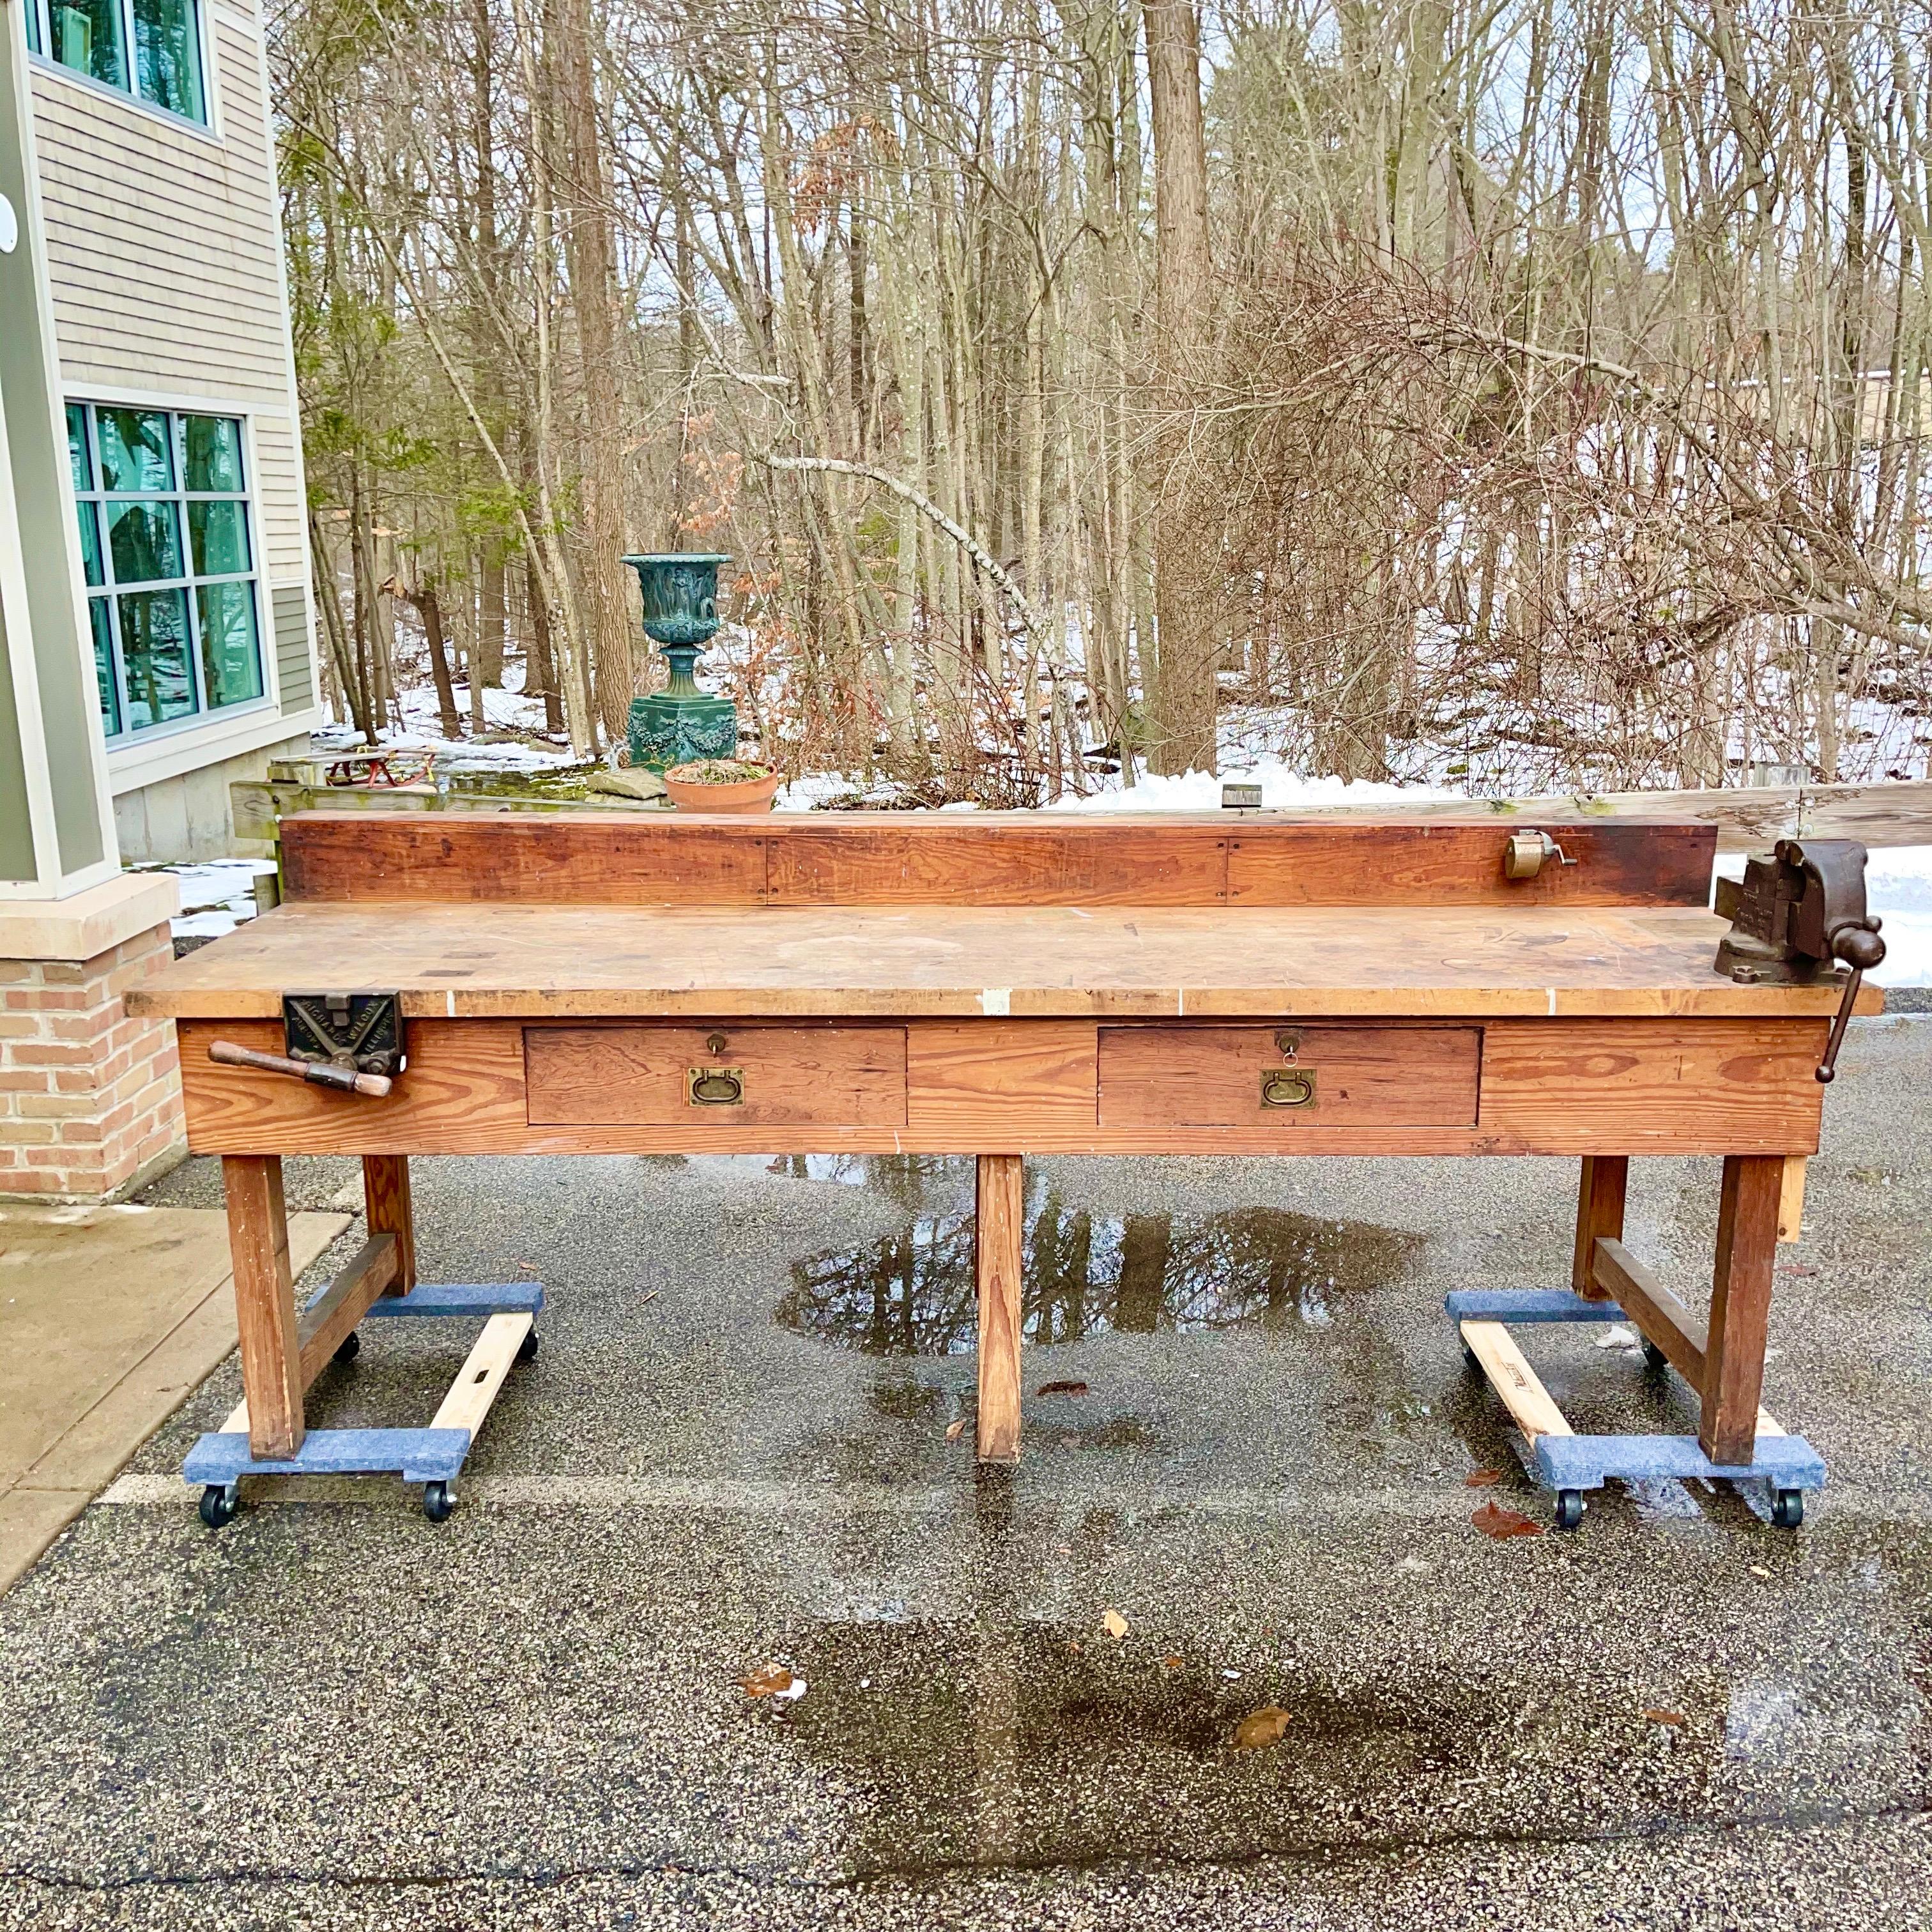 Authentic heavy duty work bench table made circa 1926
Two deep locking drawers with keys.
Richards-Wilcox quick-release woodworkers vise (Patent US1055278).
Bench dogs.
Rock Island Vise No. 51
From the George W. Treat house, Braintree, MA,